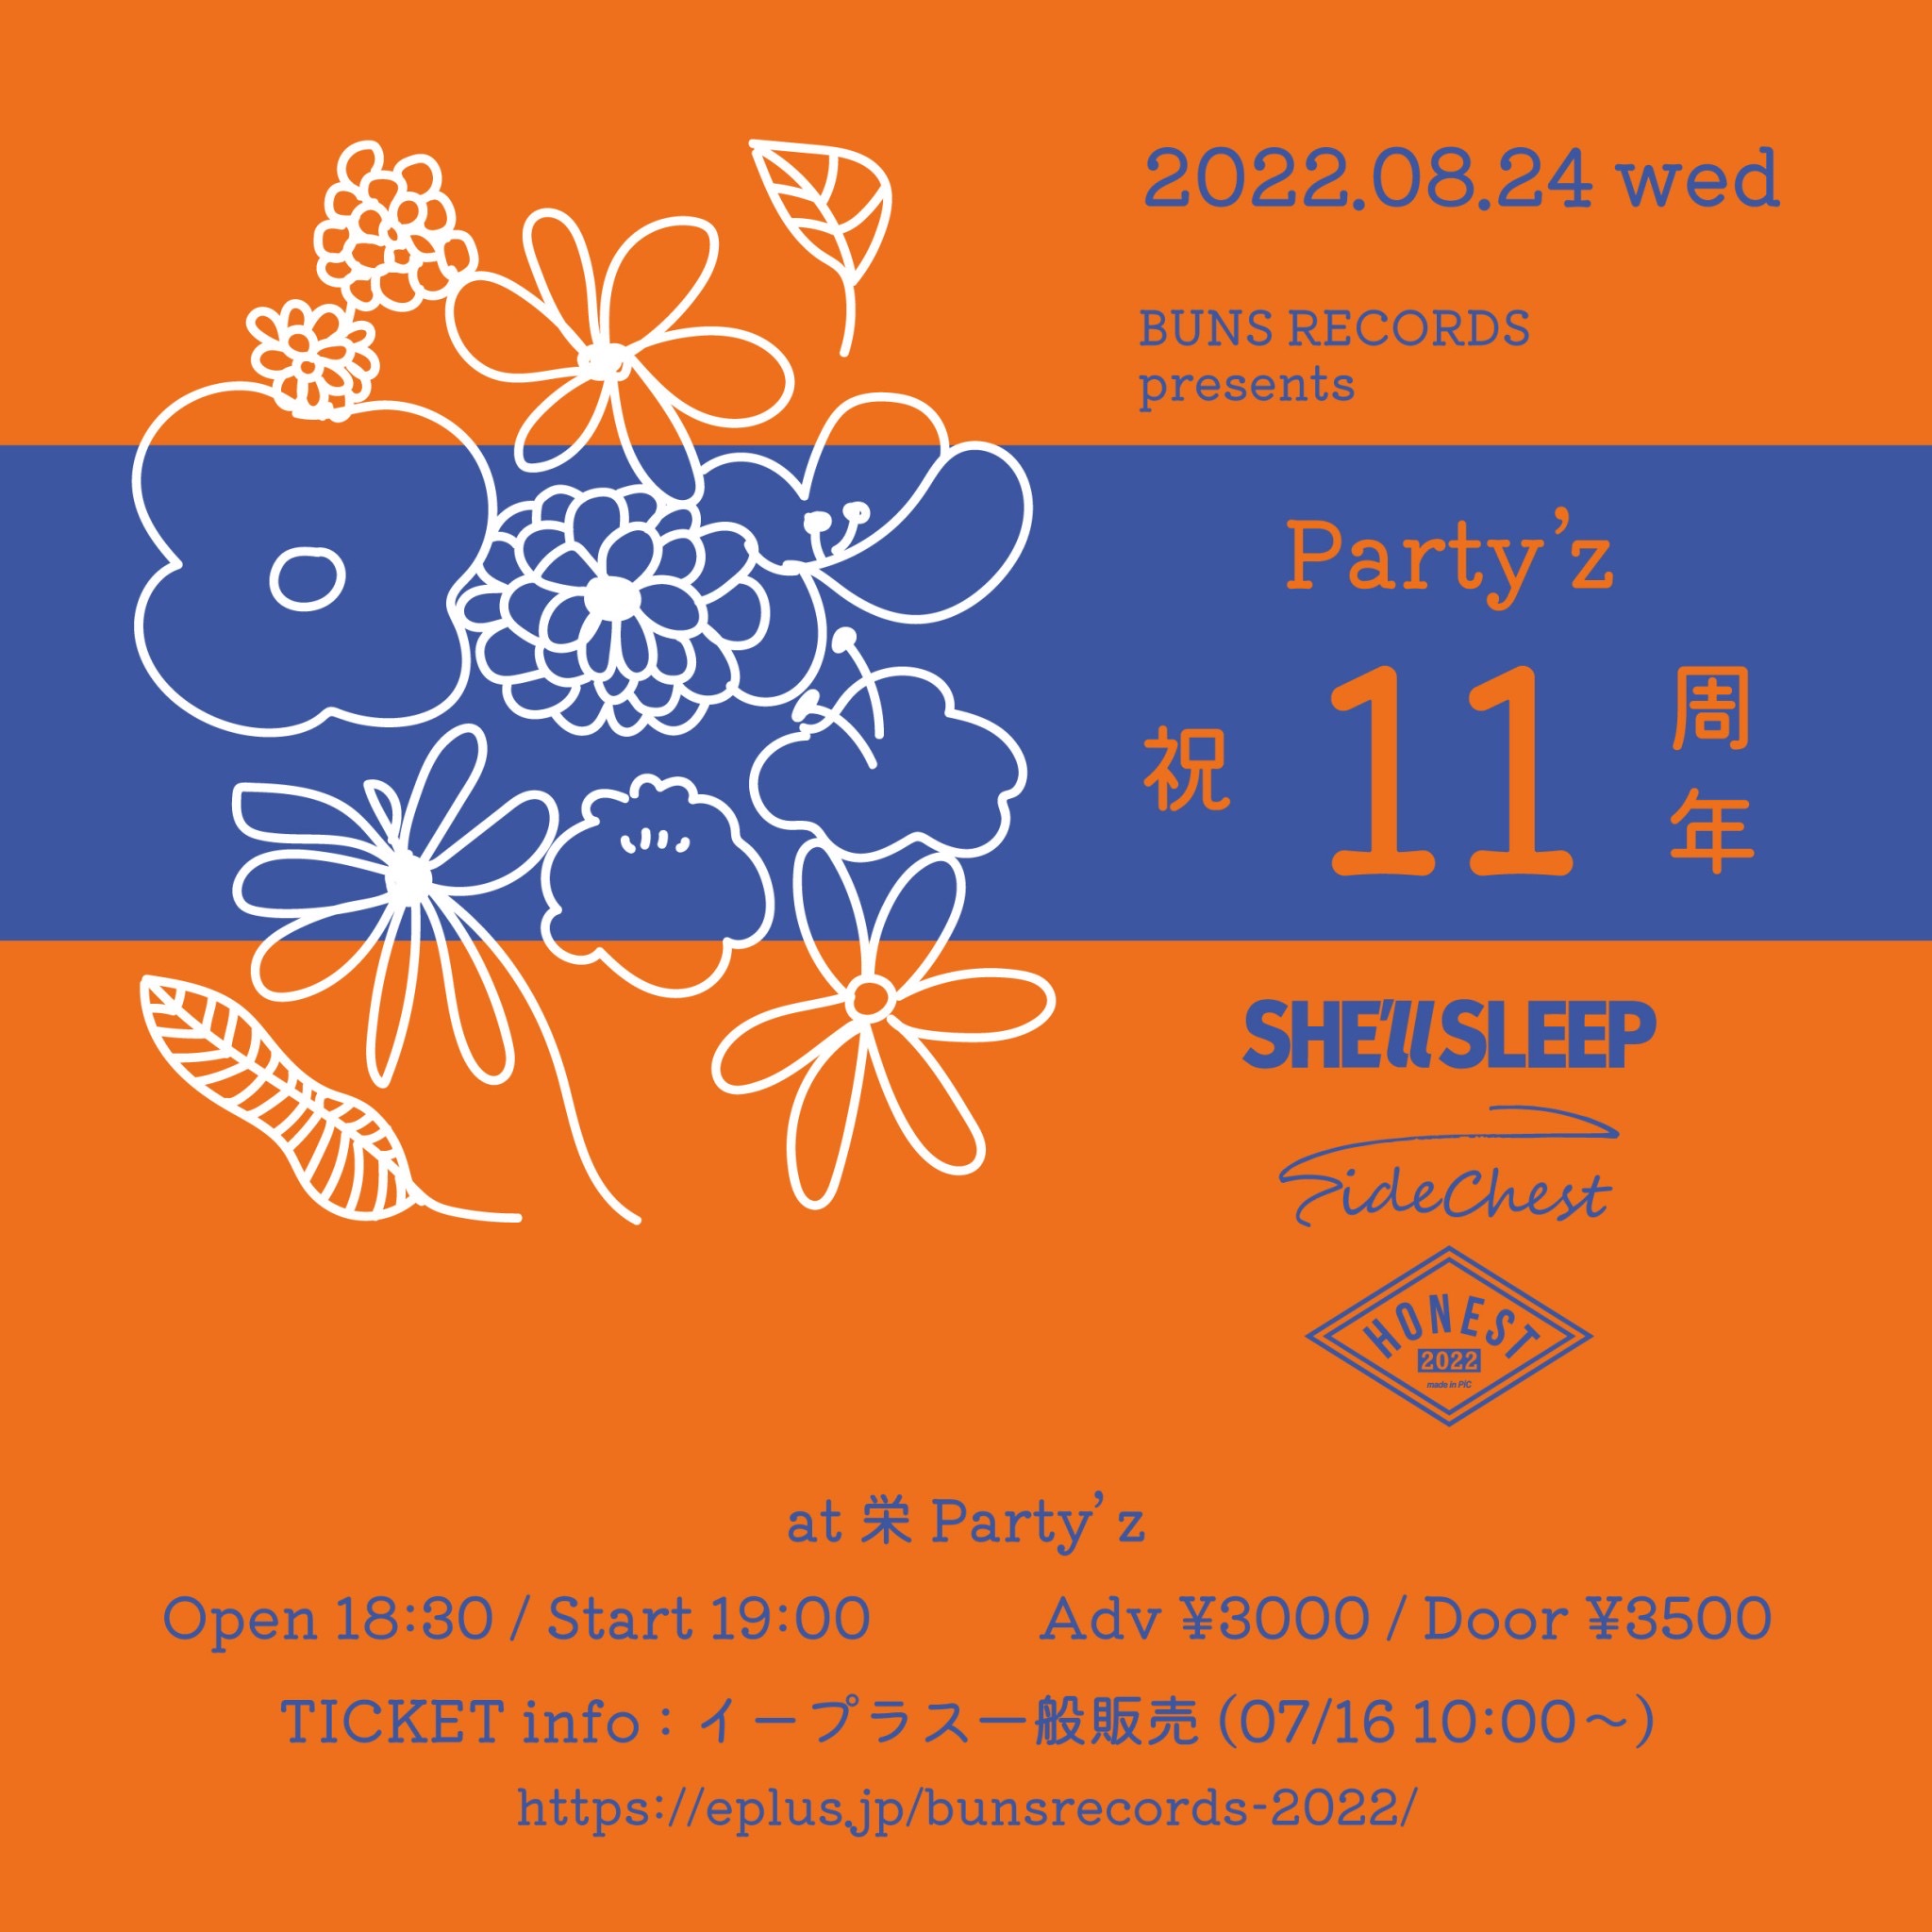 BUNS RECORDS presents “Party’z 祝 11周年”